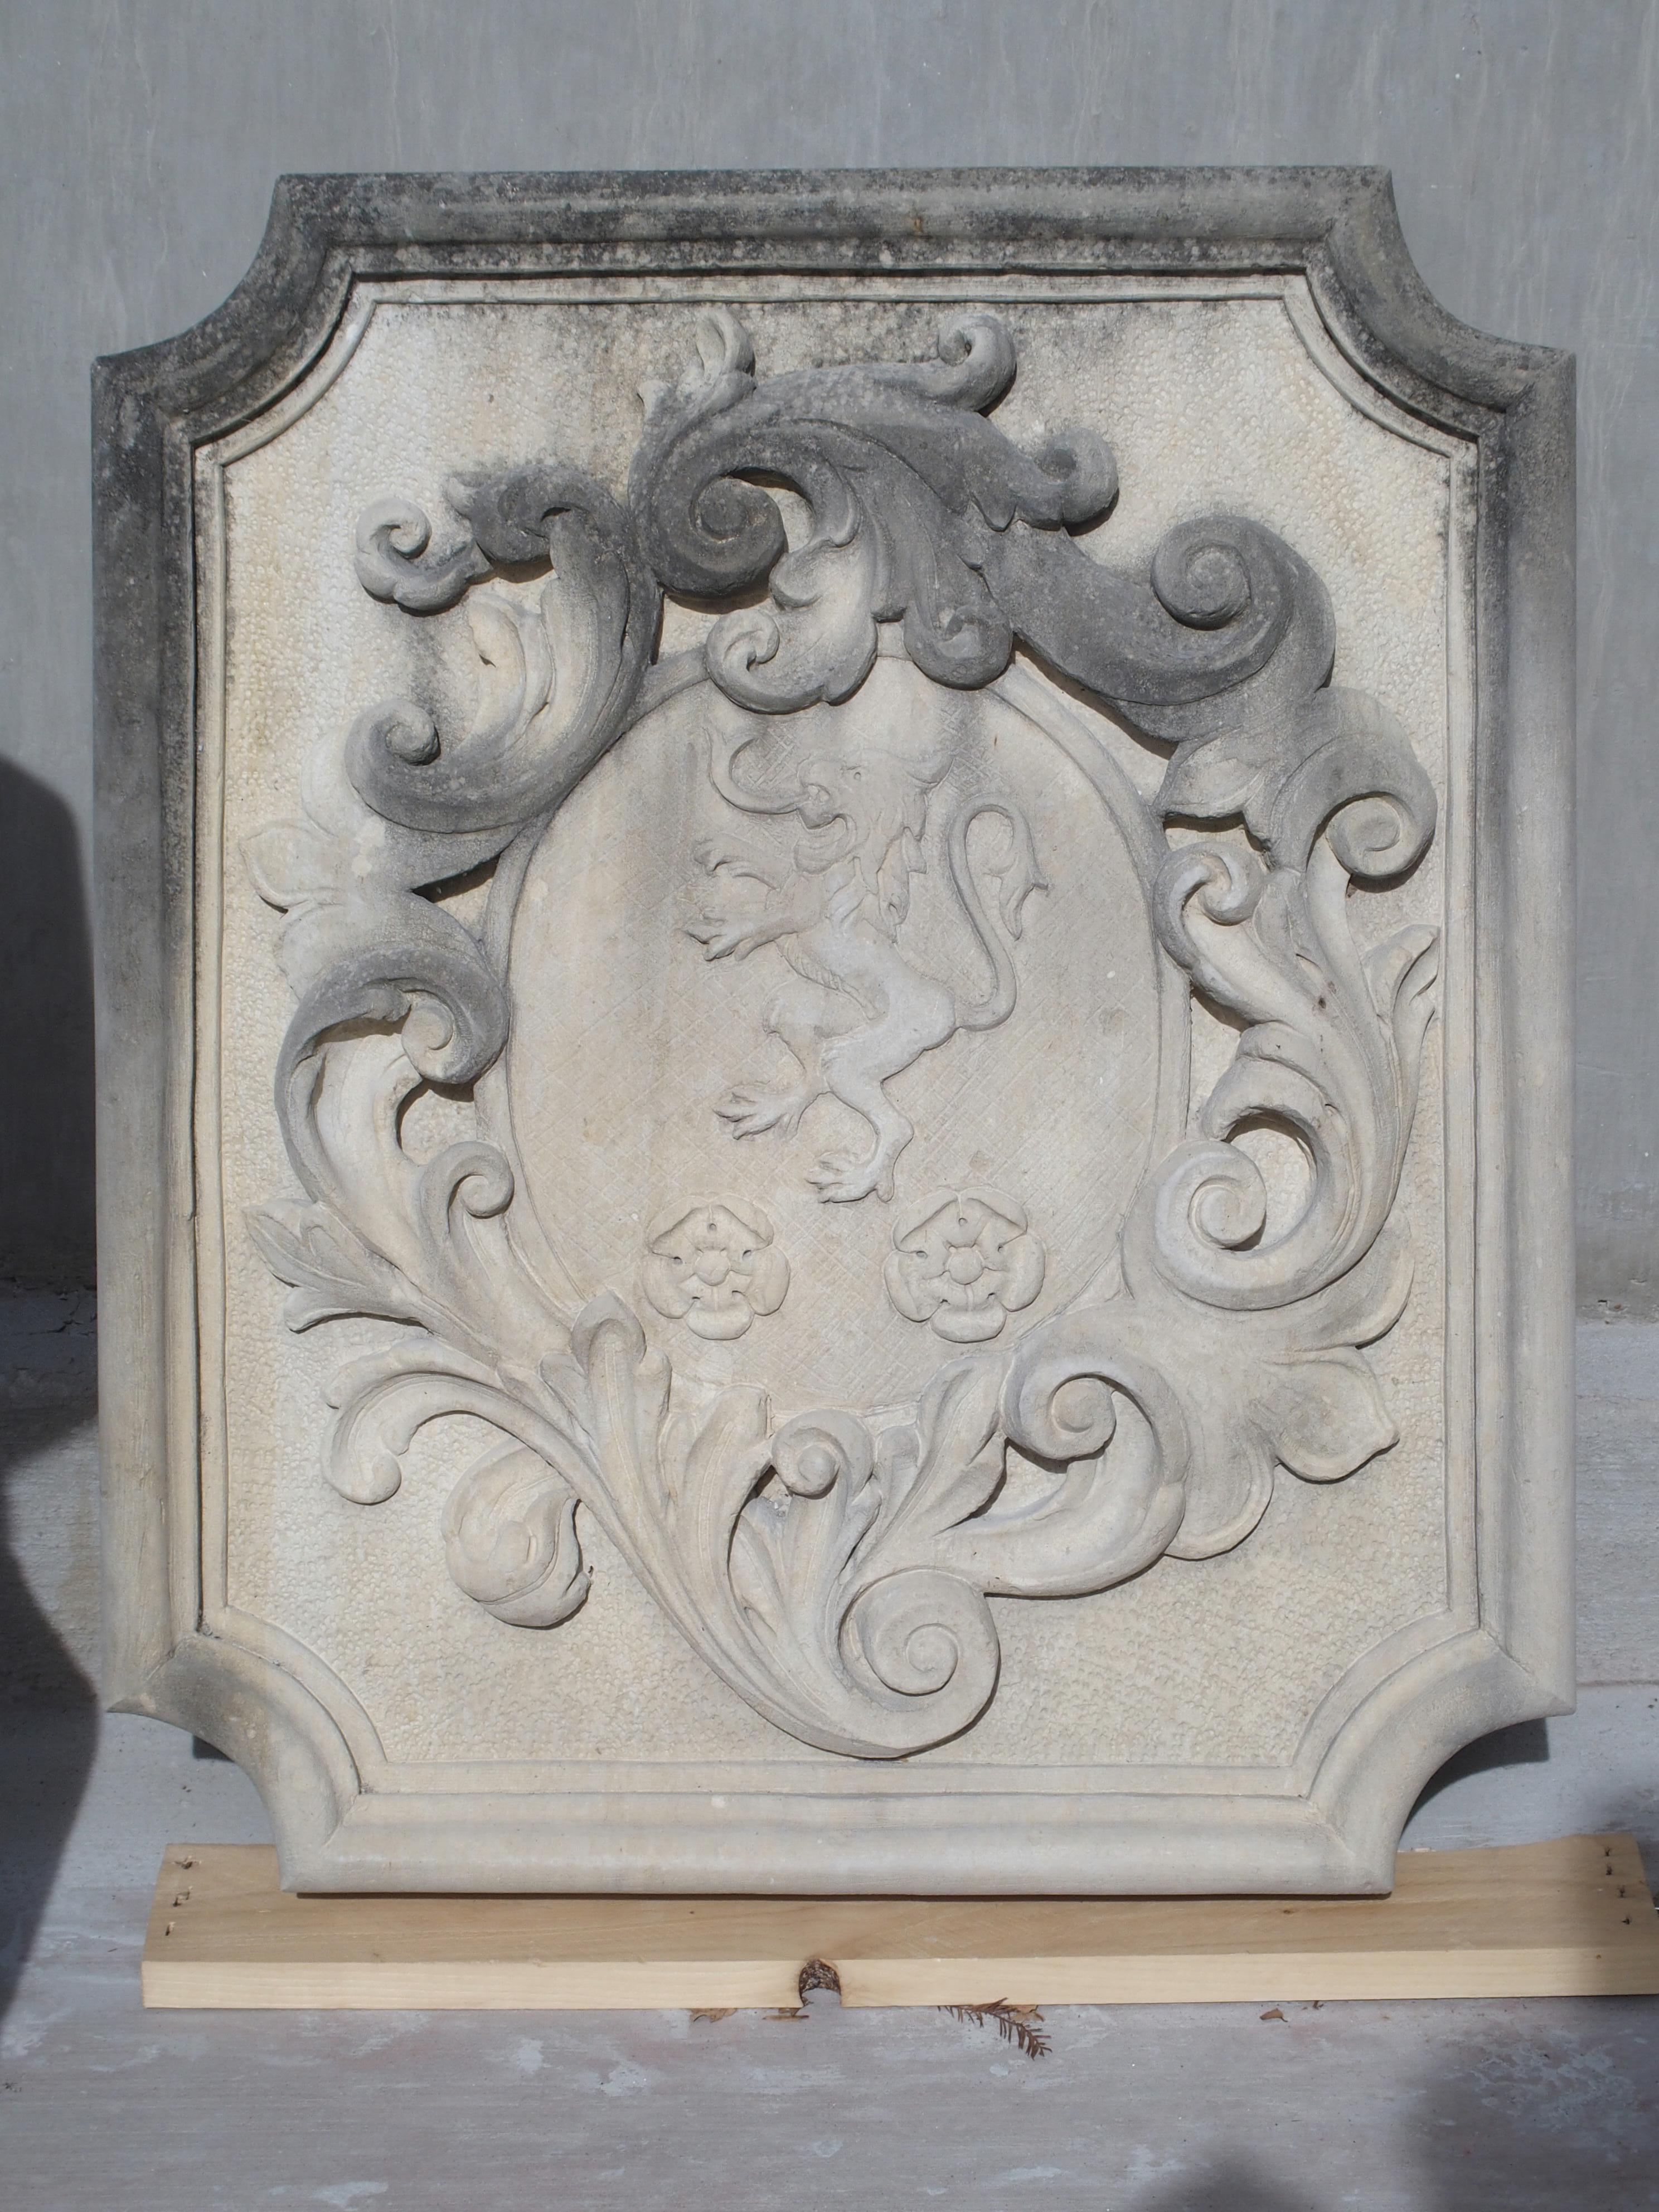 This masterfully hand carved coat of arms plaque is from Italy and made from natural Vicenza stone. It depicts a rampant lion facing left with two floral motifs beneath. Surrounding the center oval are large and flowing asymmetrical acanthus leaves